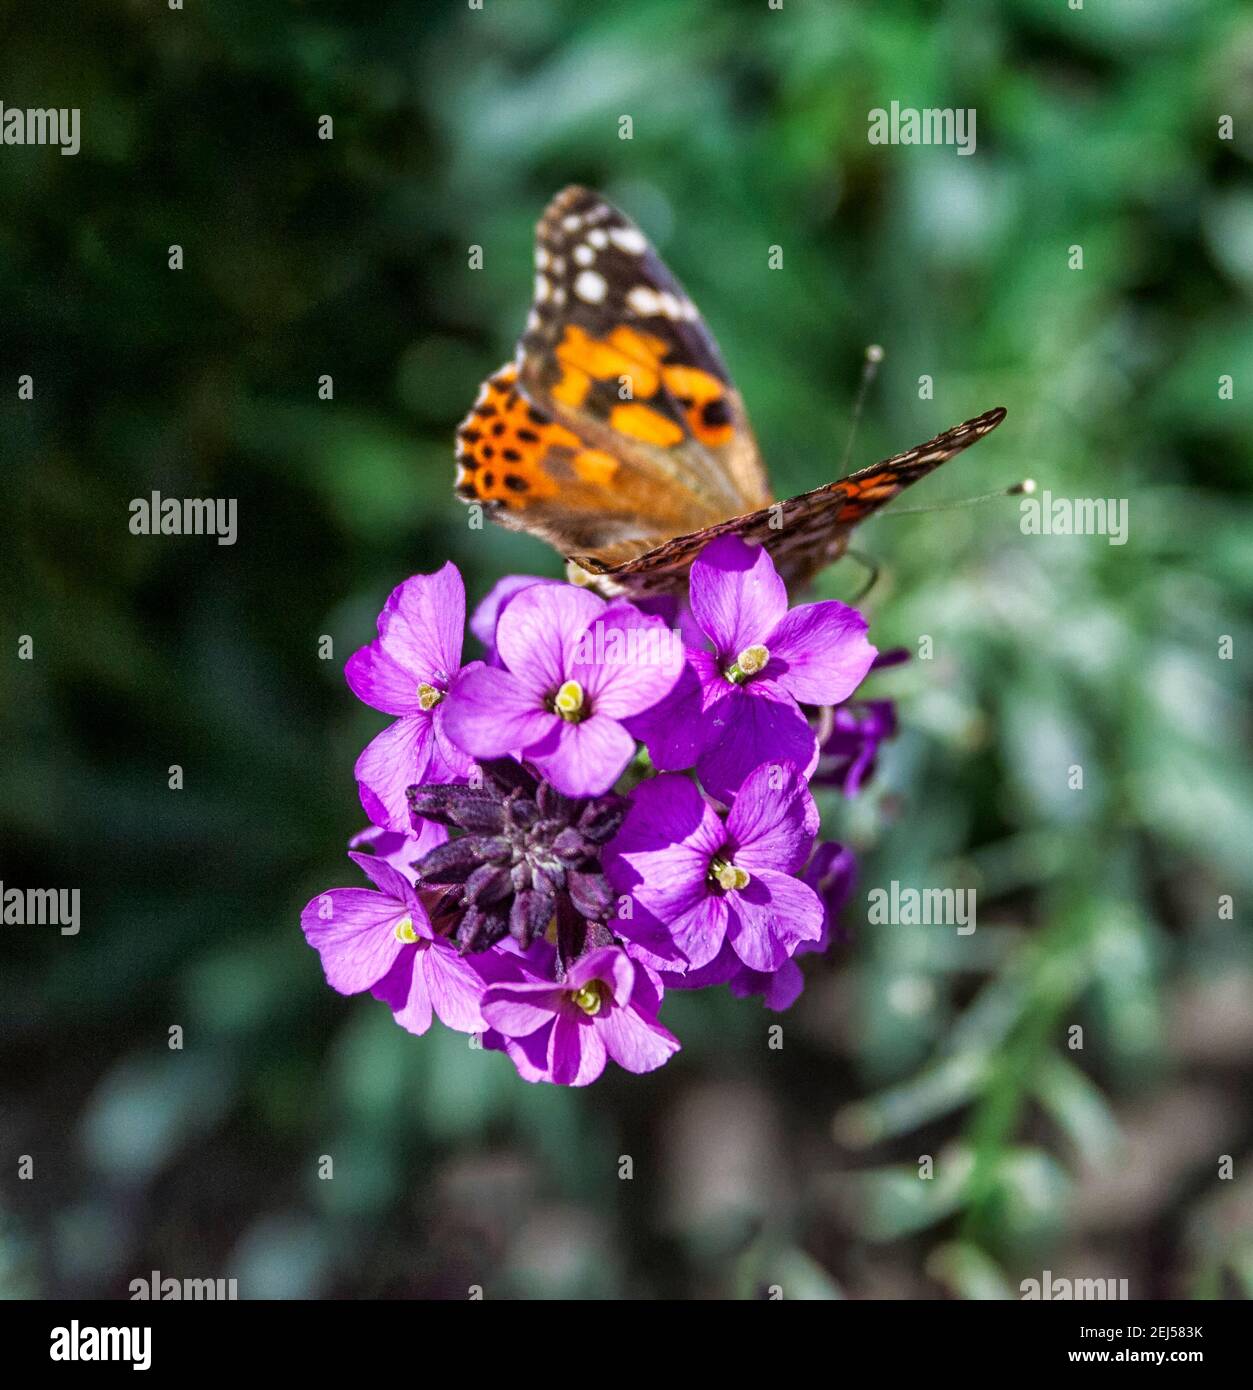 A Painted Lady butterfly (Vanessa cardui) drinking nectar from a purple flower, blurred green foliage in the background Stock Photo